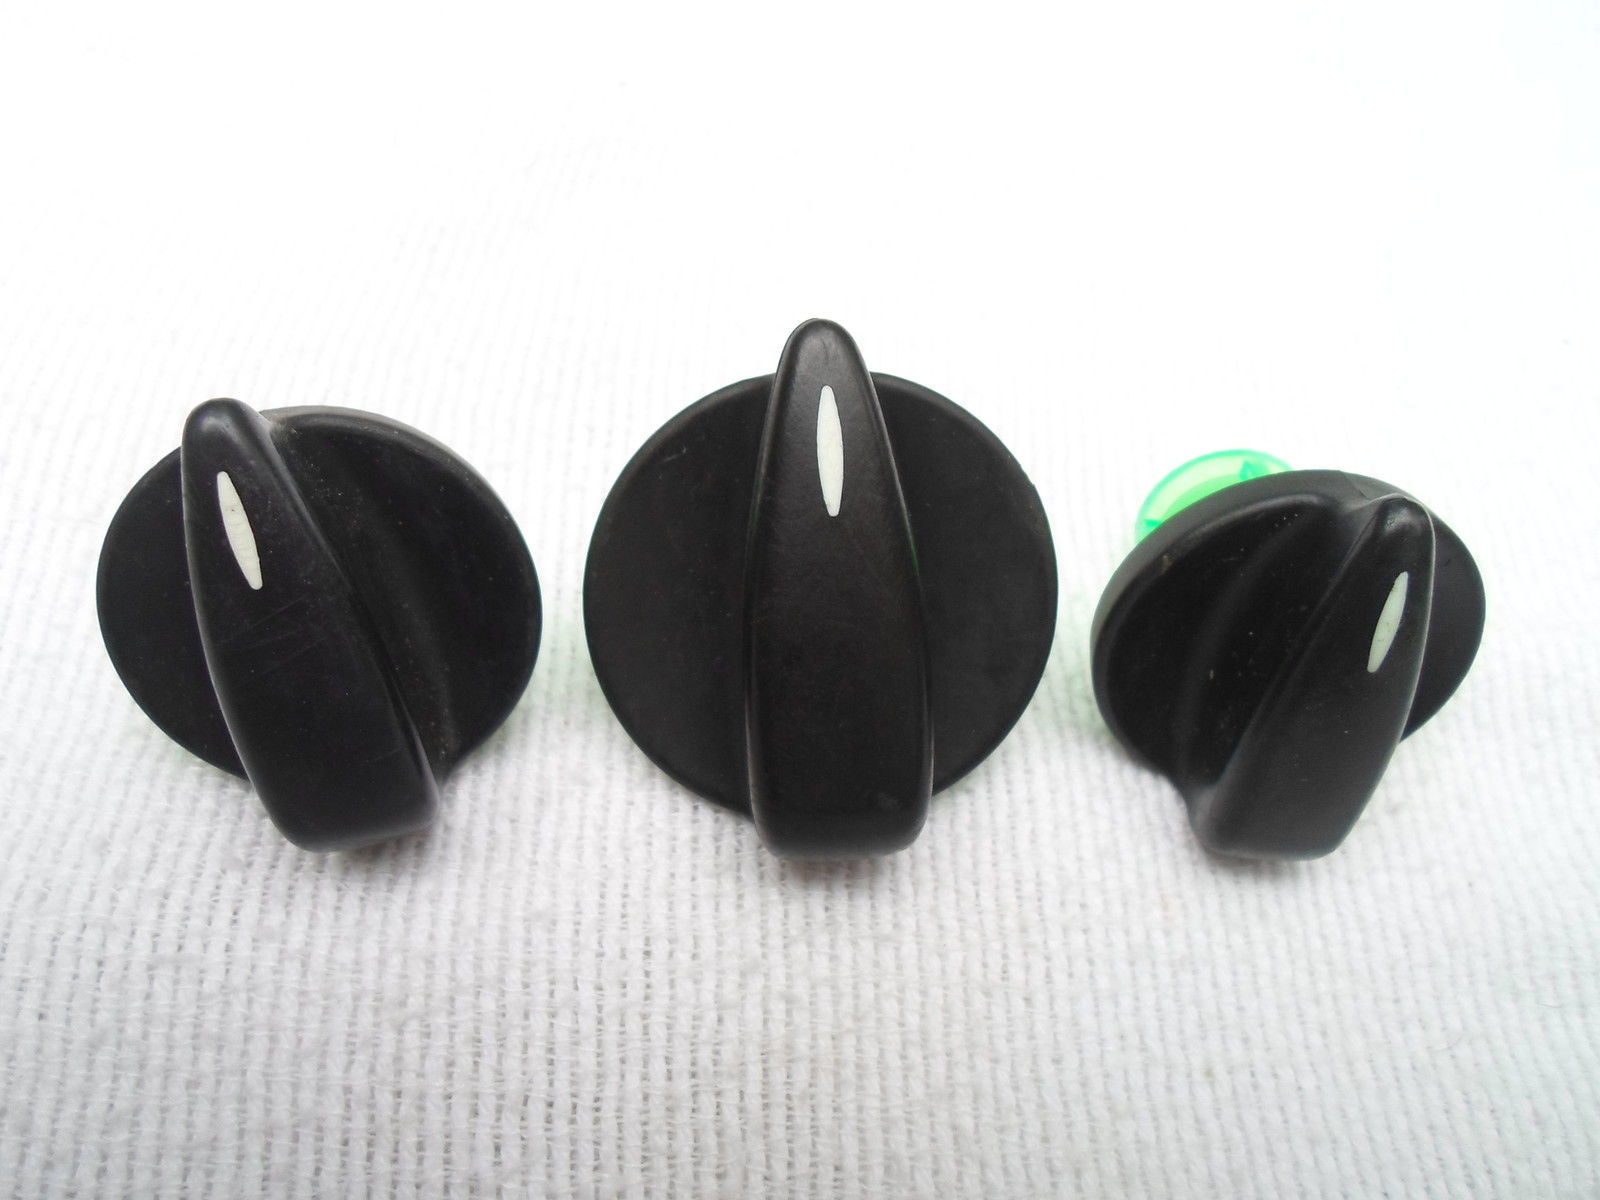 00-07 Ford Focus OEM AC Heater Climate Control Knobs Set of 3 OEM! Free Shipping